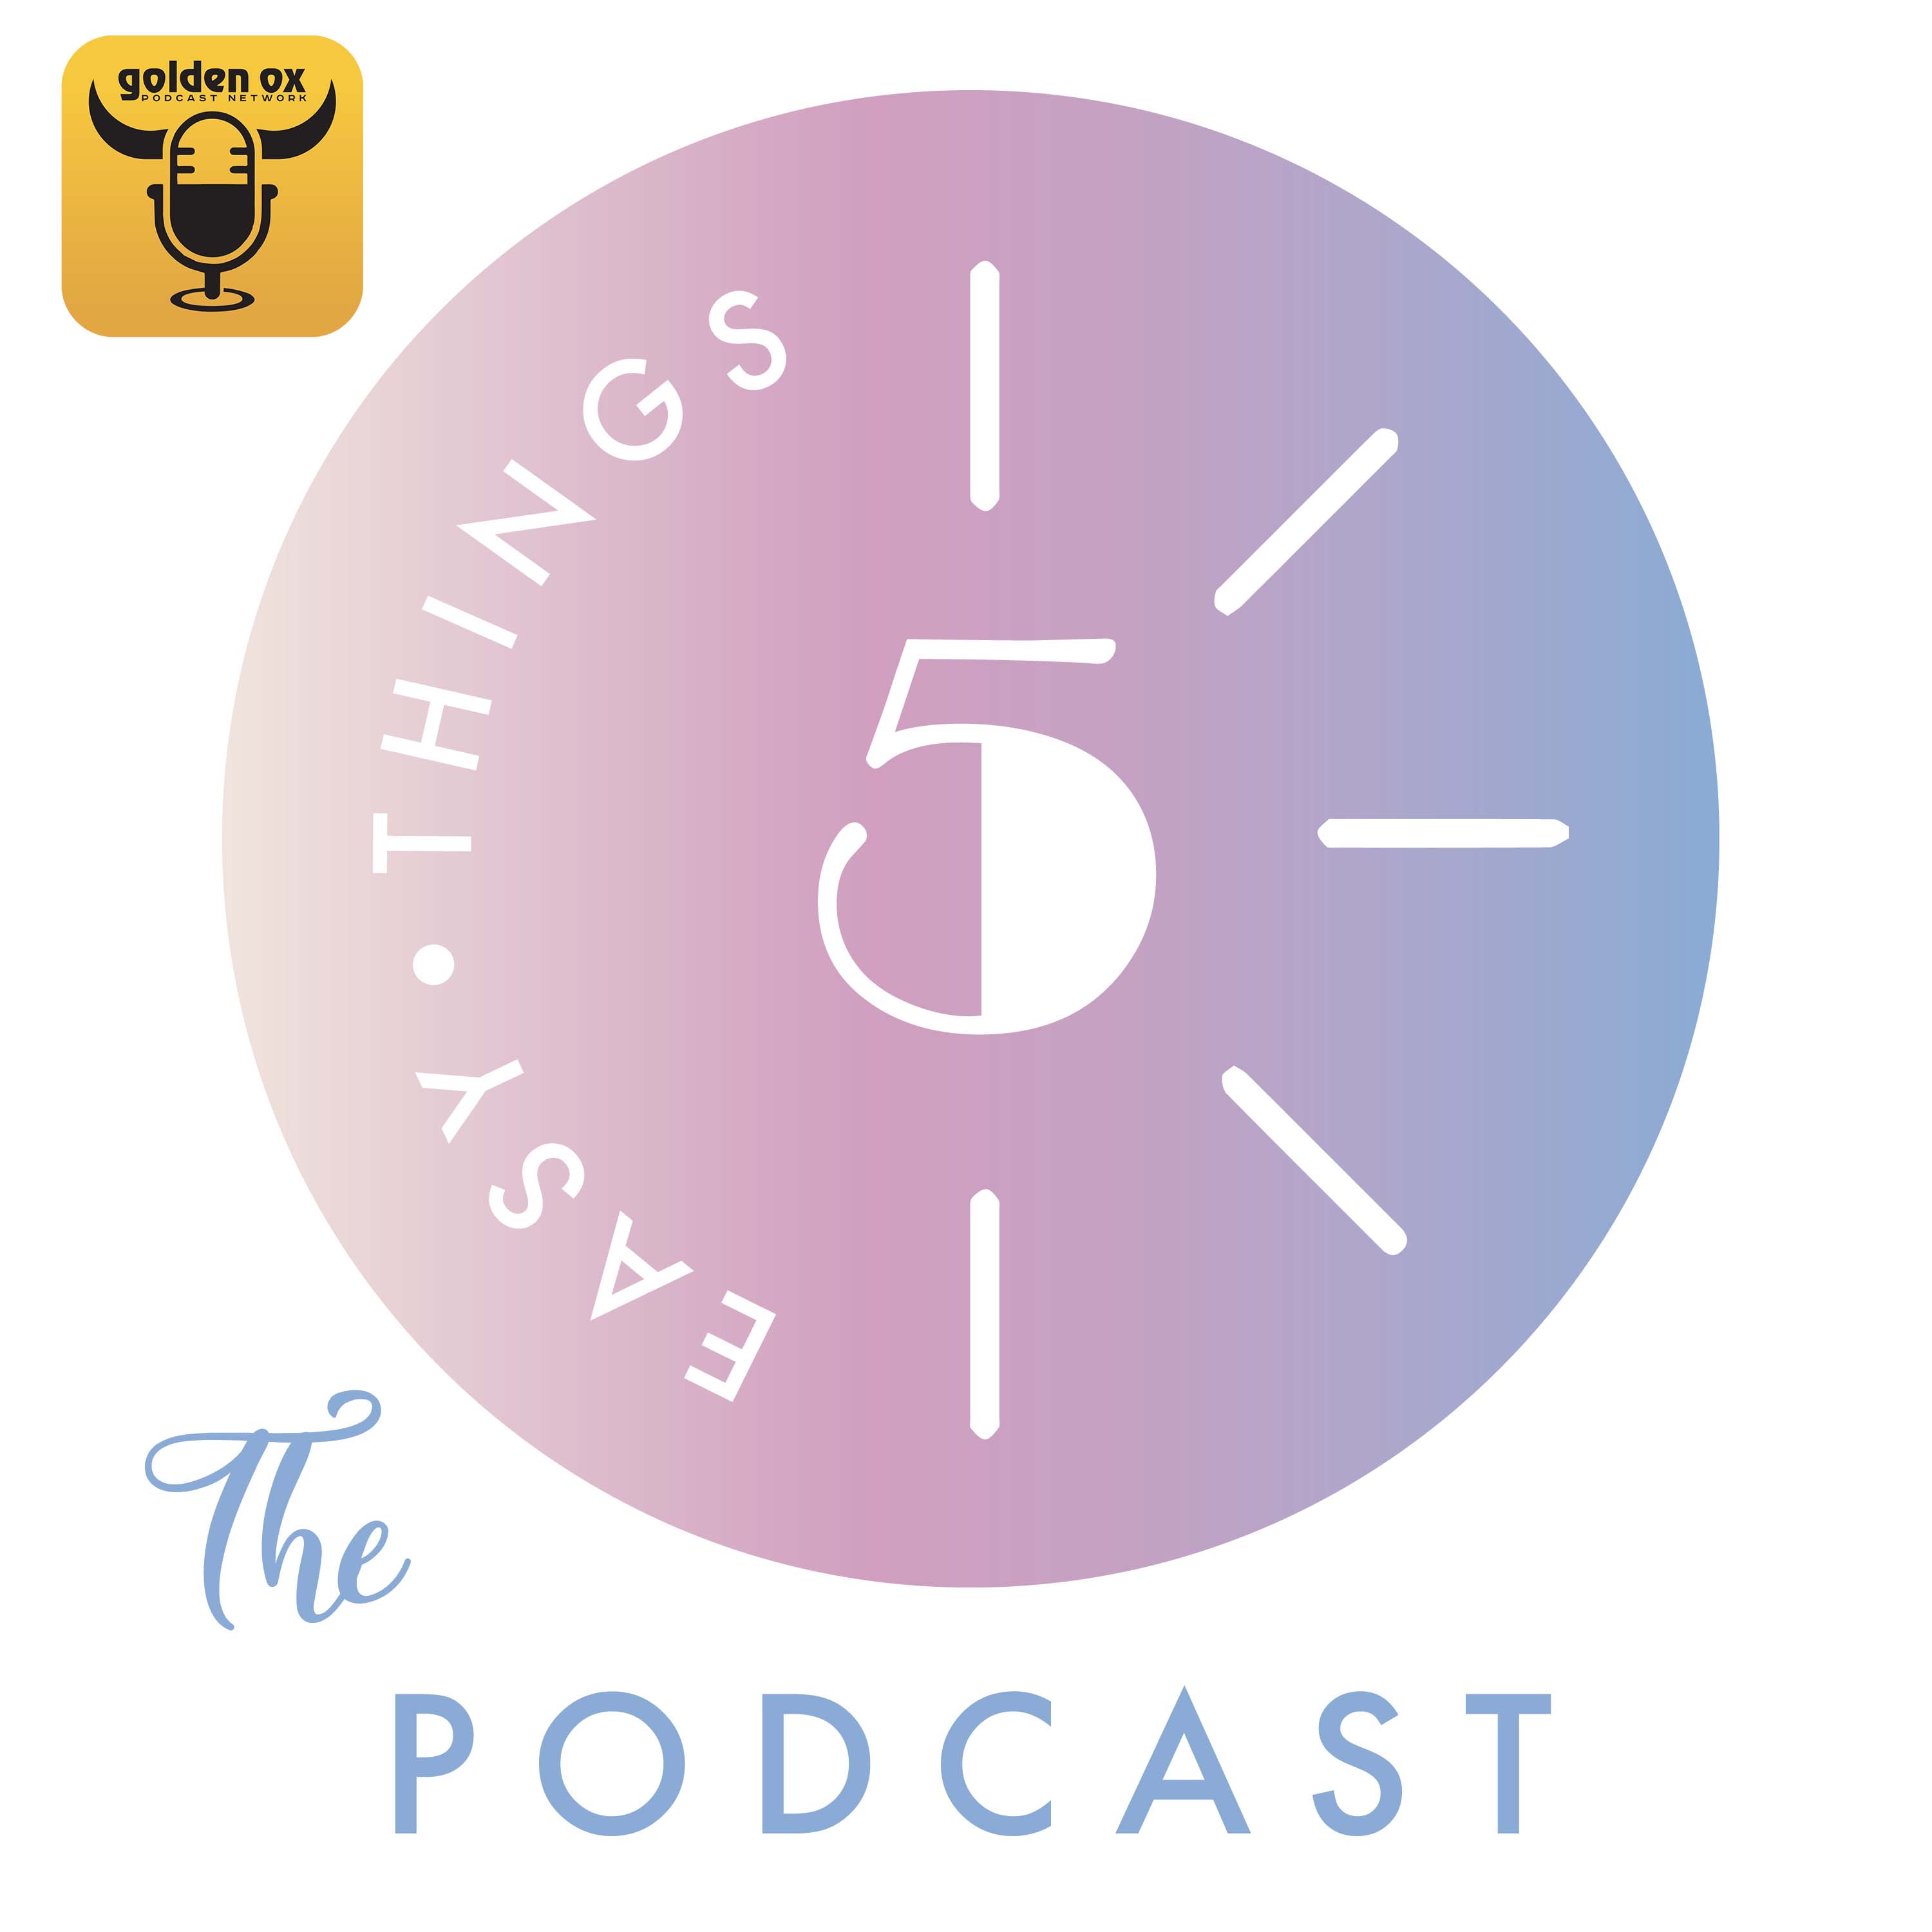 Five Easy Things the Podcast's artwork